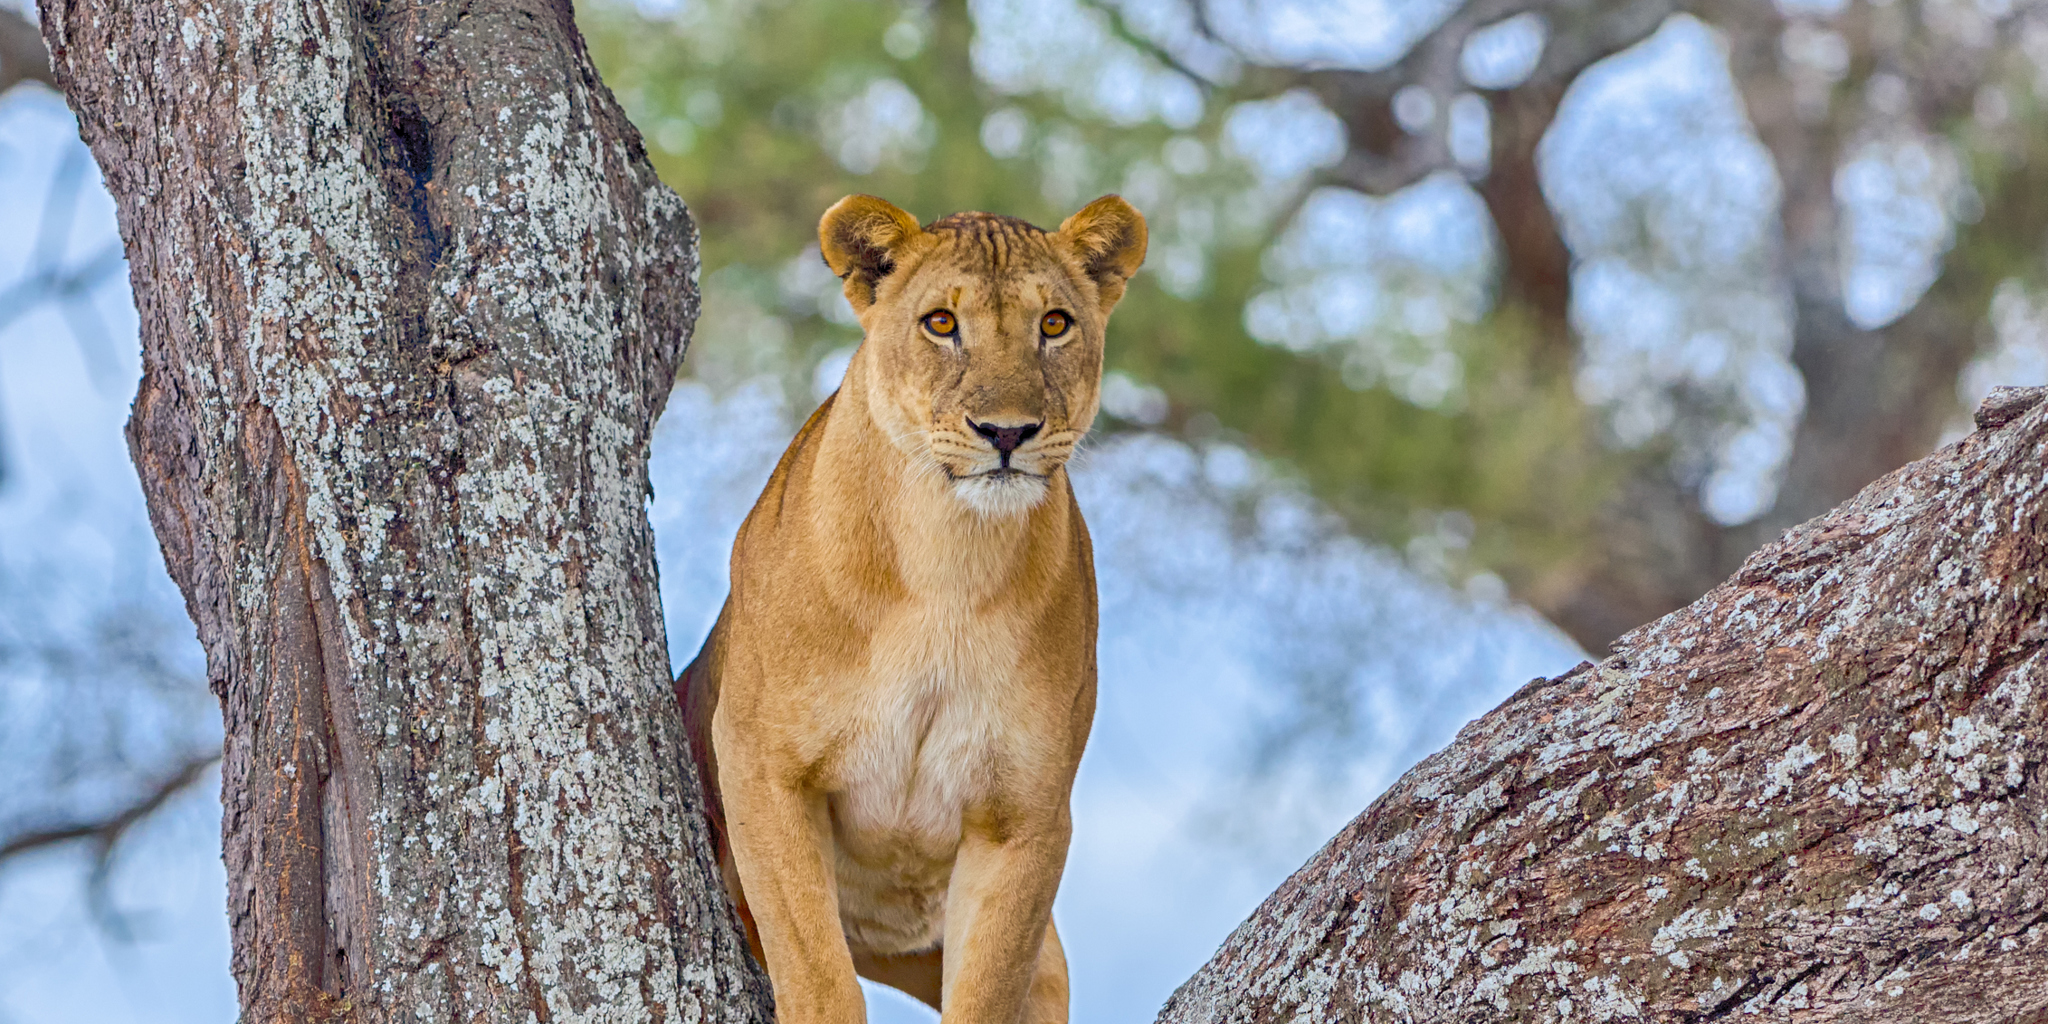 A female lion standing in the crook of a tree, Tarangire National Park